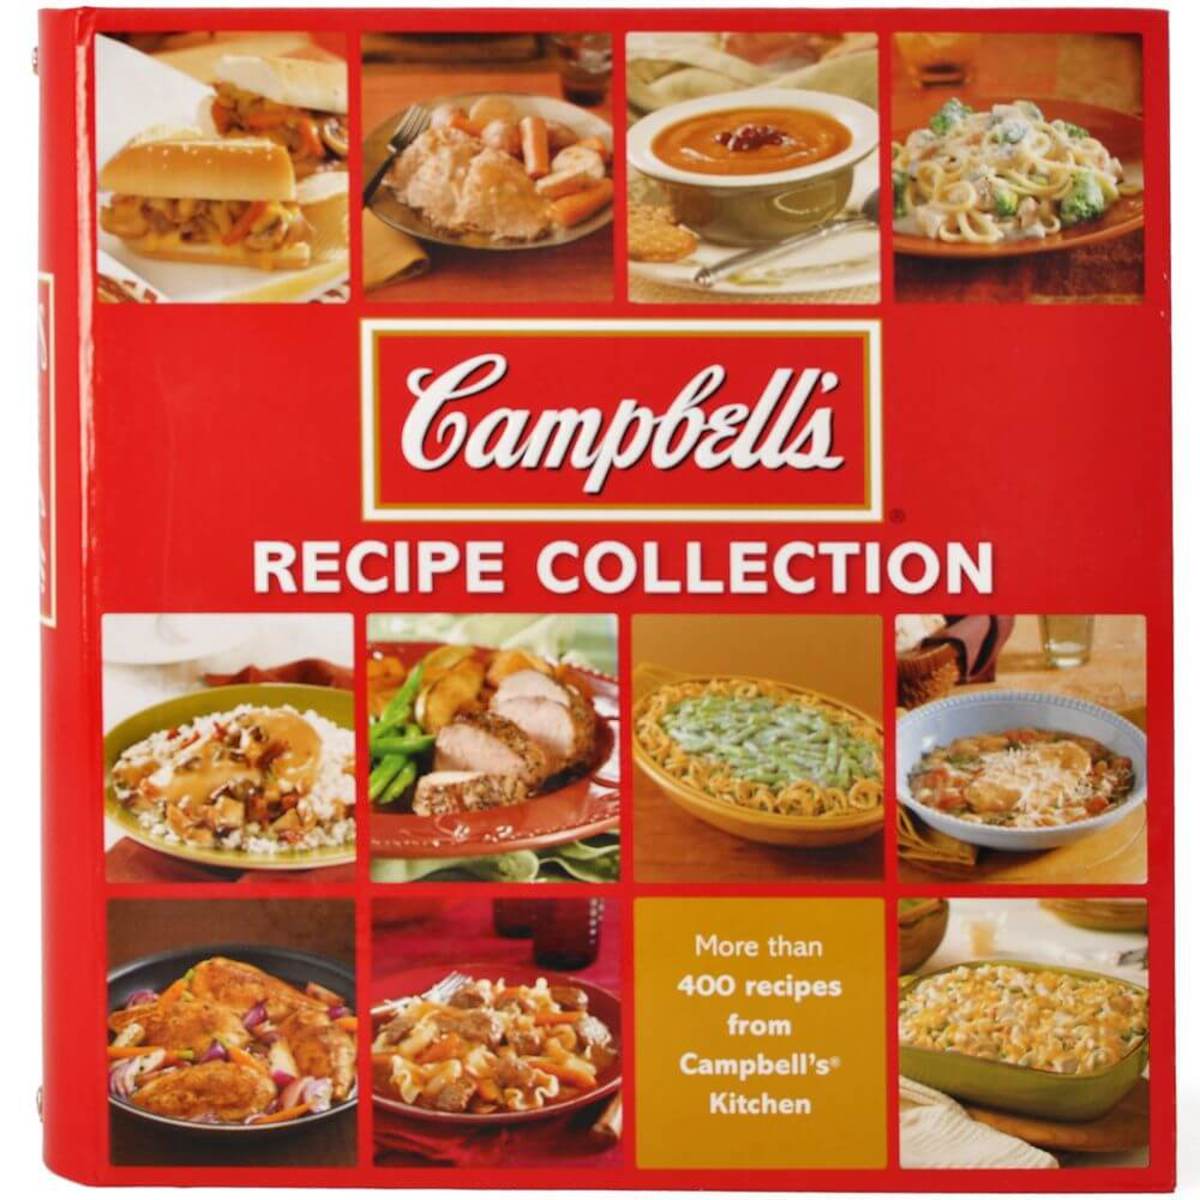 This is another Campbell's cookbook I have.